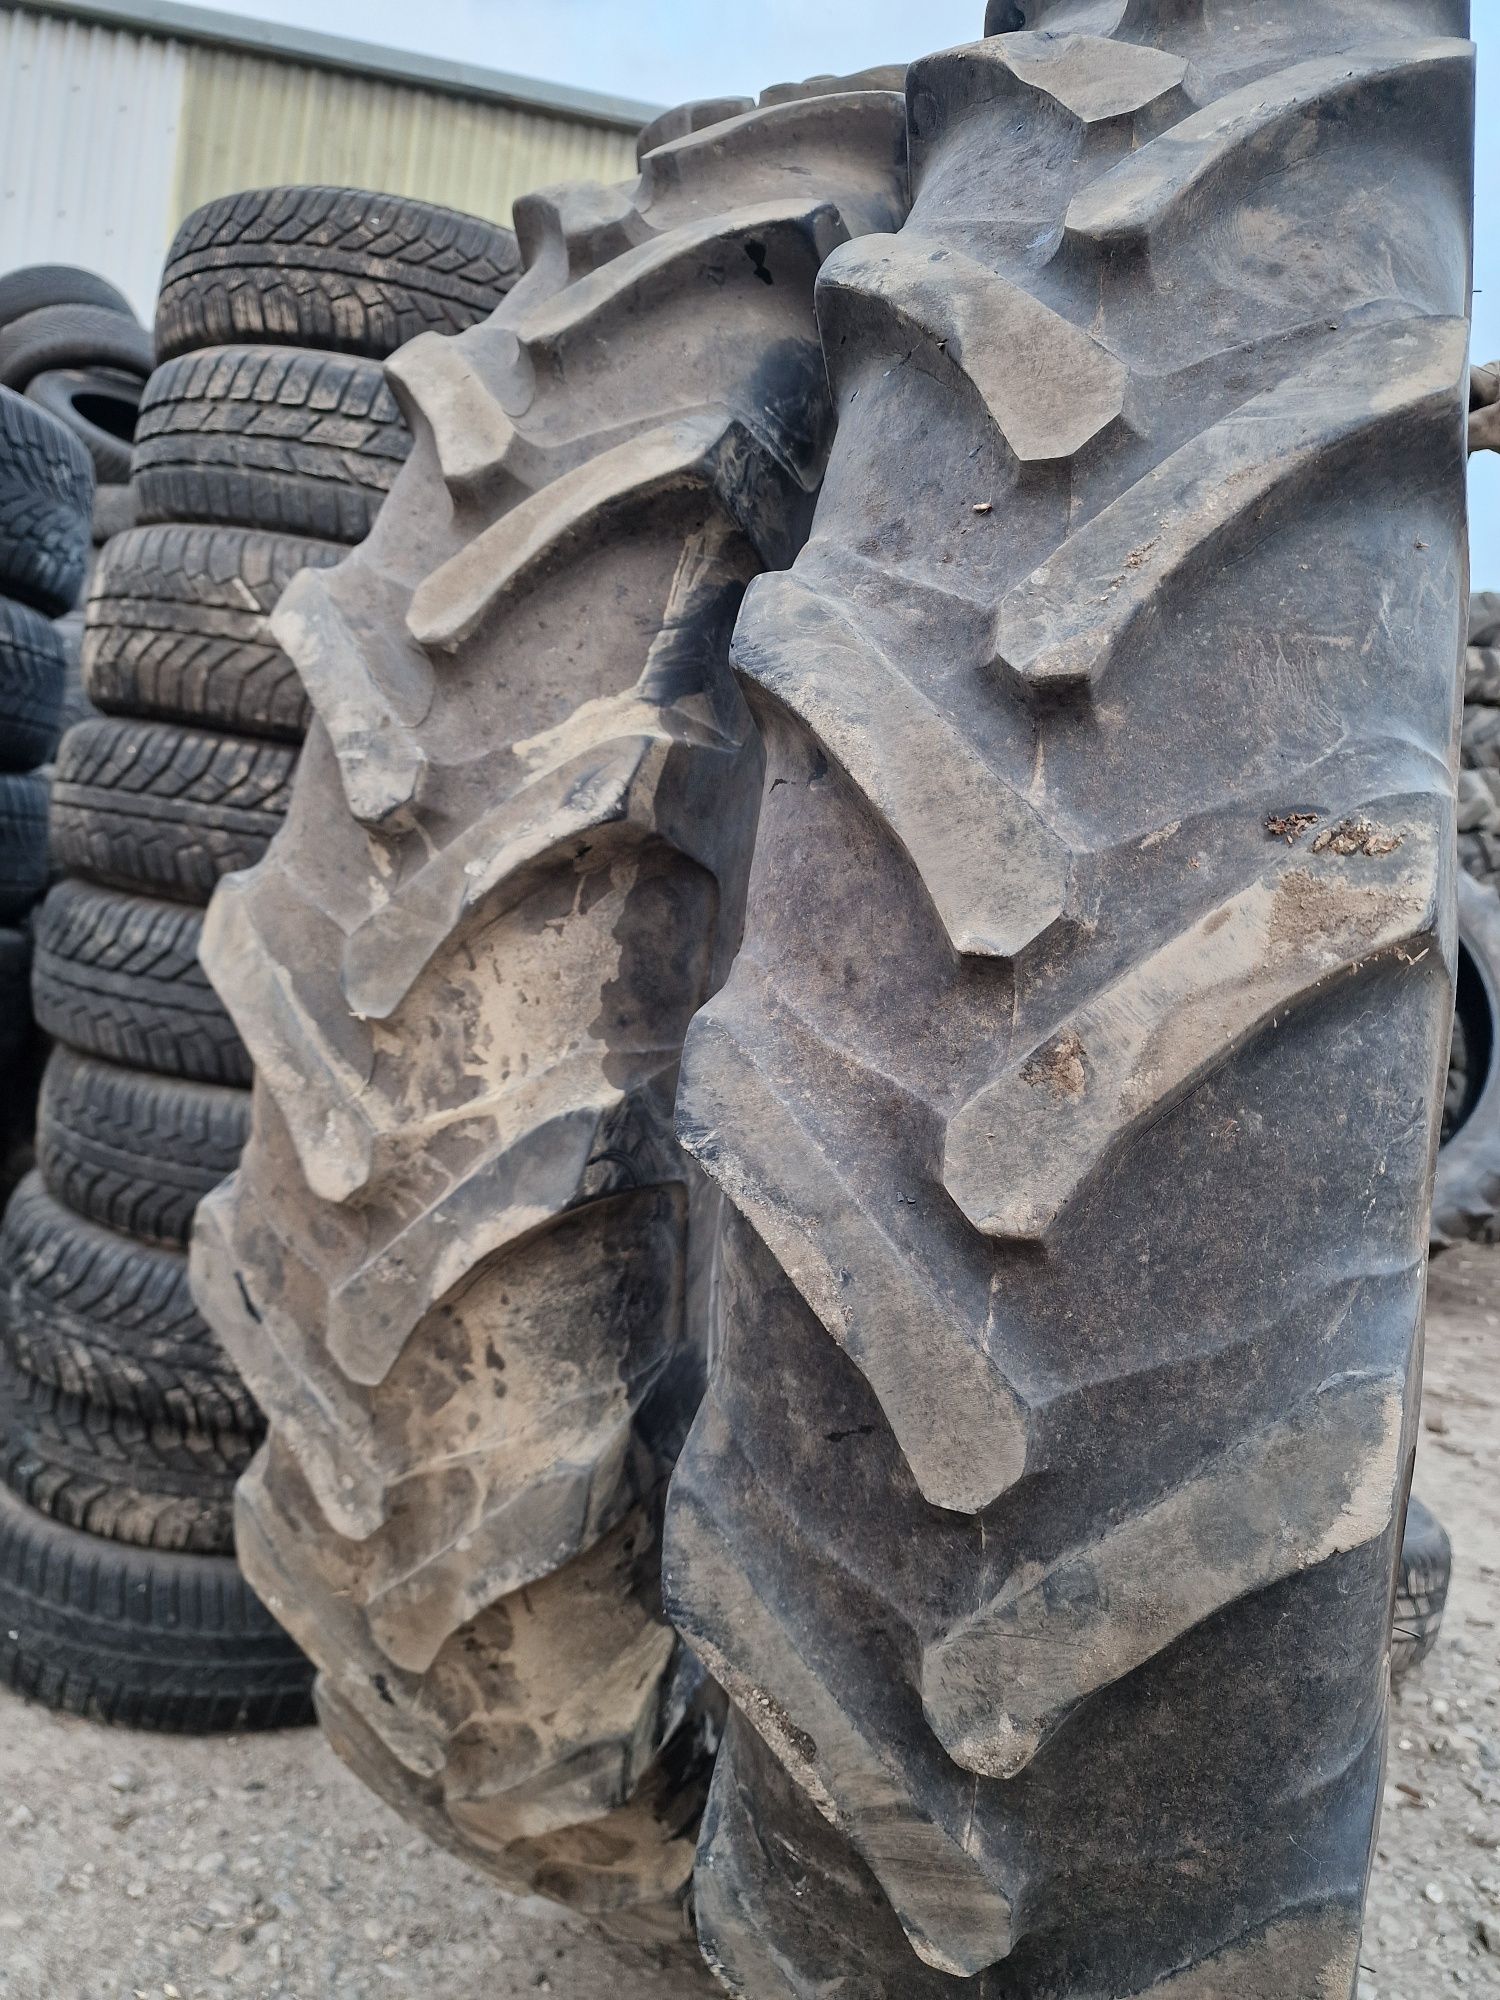 ANVELOPE tractor 11.2R42 (270/95R42)  marca Alliance